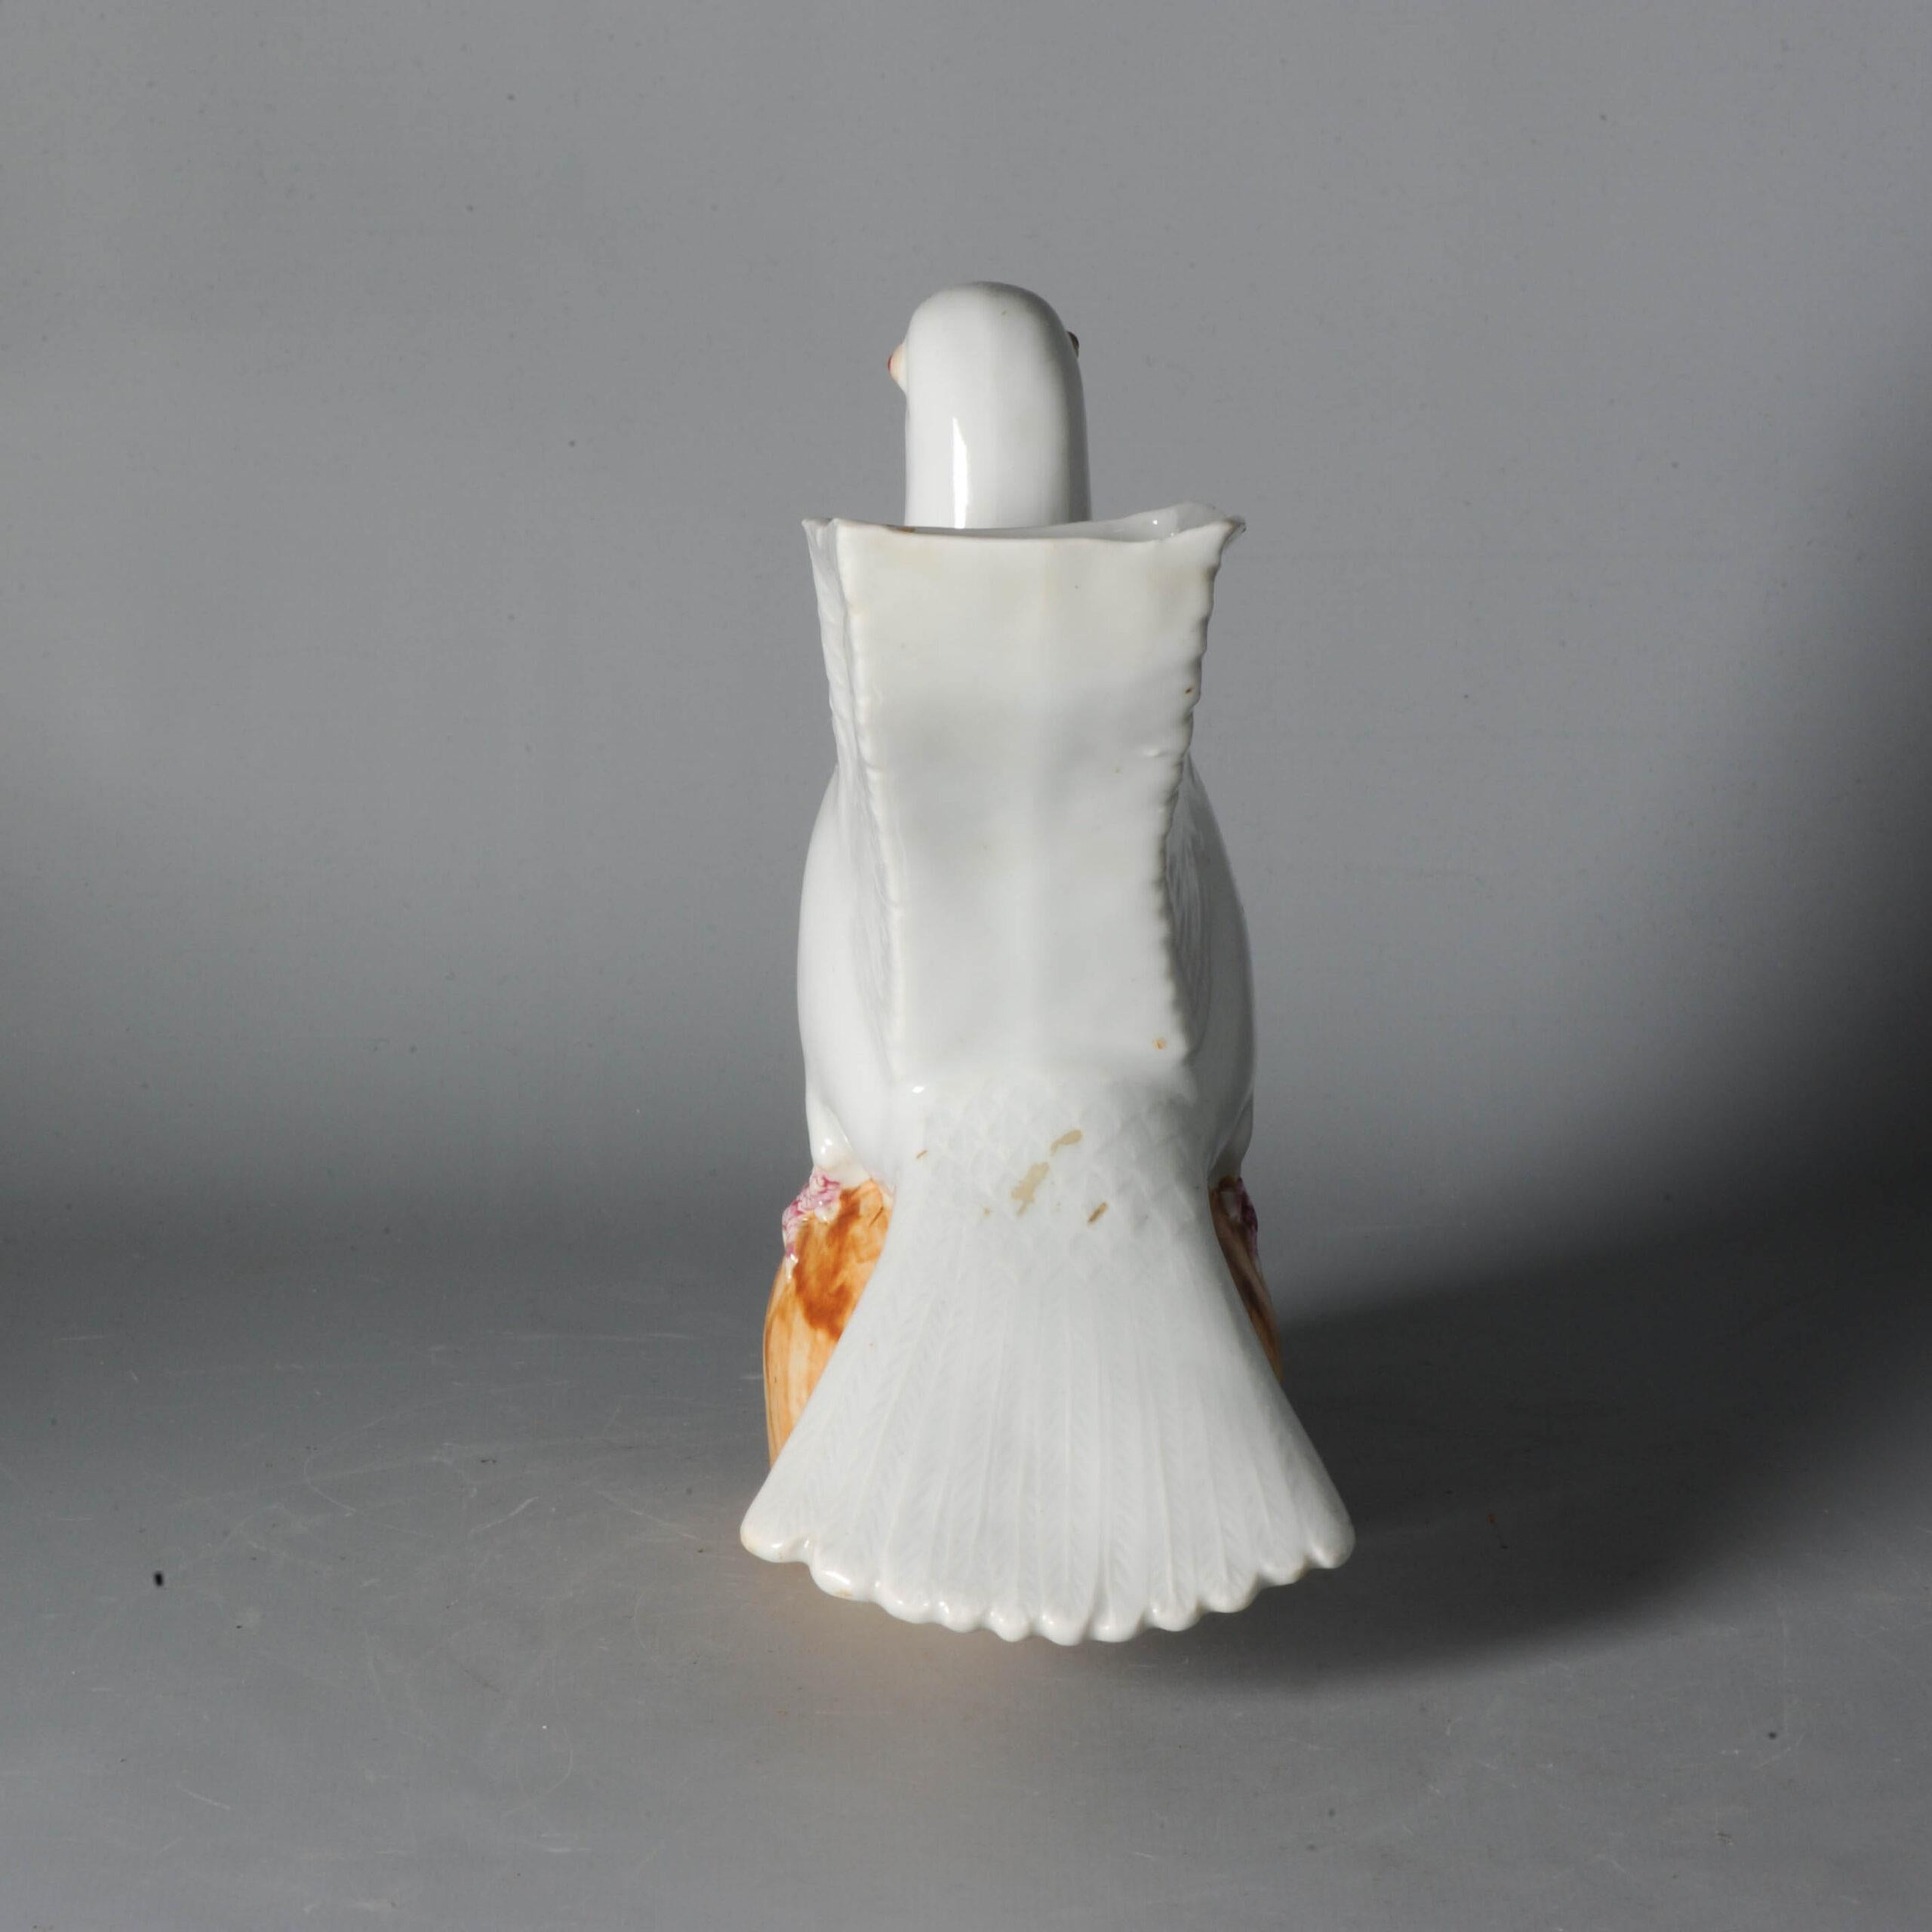 Chinese A Very Nice Spill Vase Qing or Republic Period Cream White Dove Bird For Sale